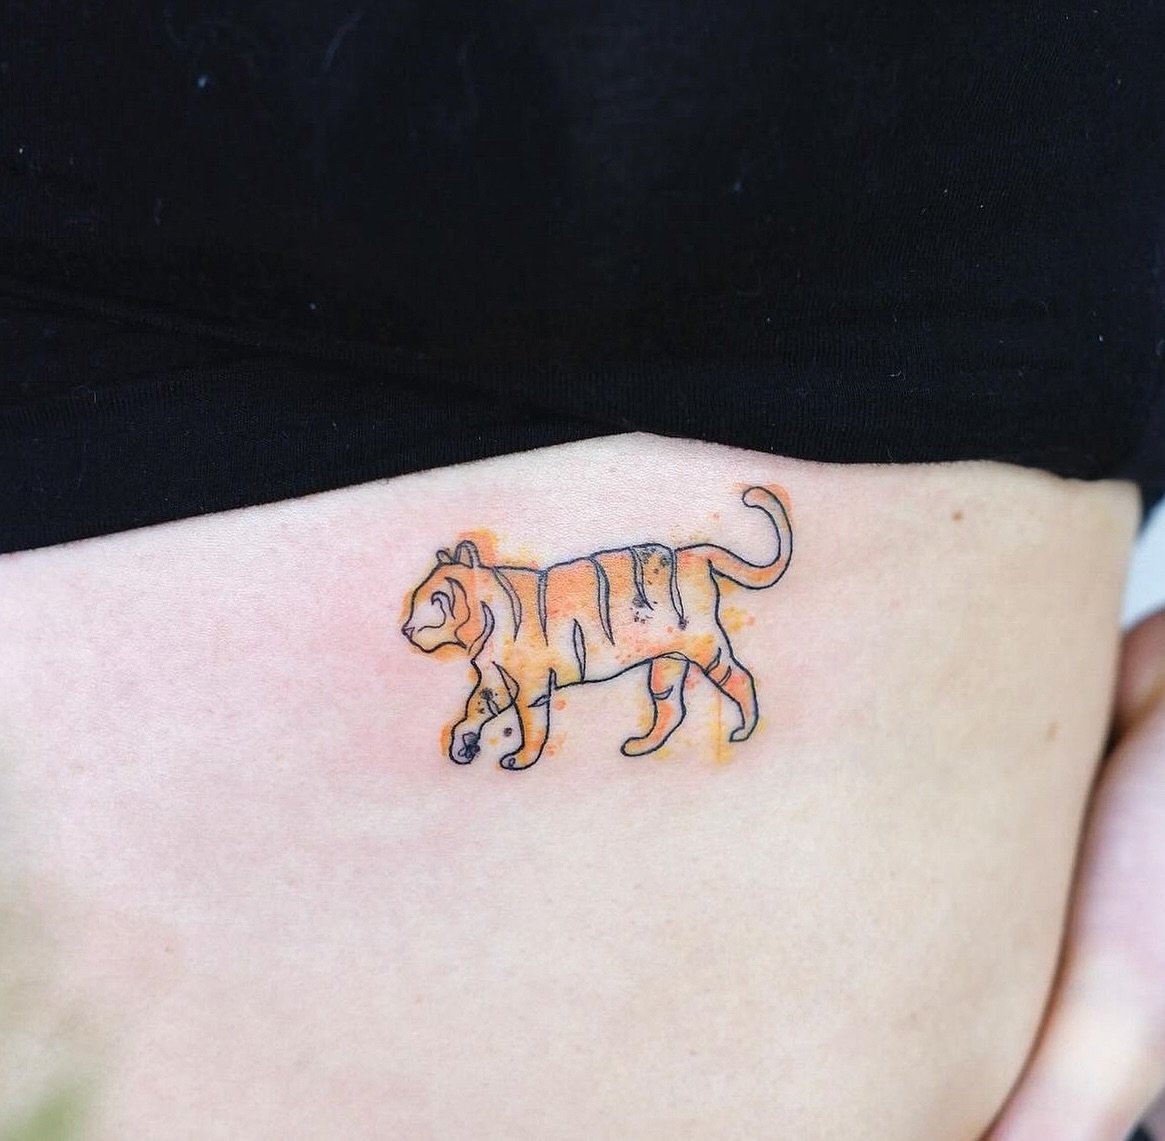 Watercolour tiger 🐯 
Artist: @tszching.tattoo 
________________________________________________
[At Off the Ground Ink, we bring your tattoo ideas to life! 💭 For bookings and inquiries, reach out to us by email at offthegroundink@gmail.com]
.
.
.
.